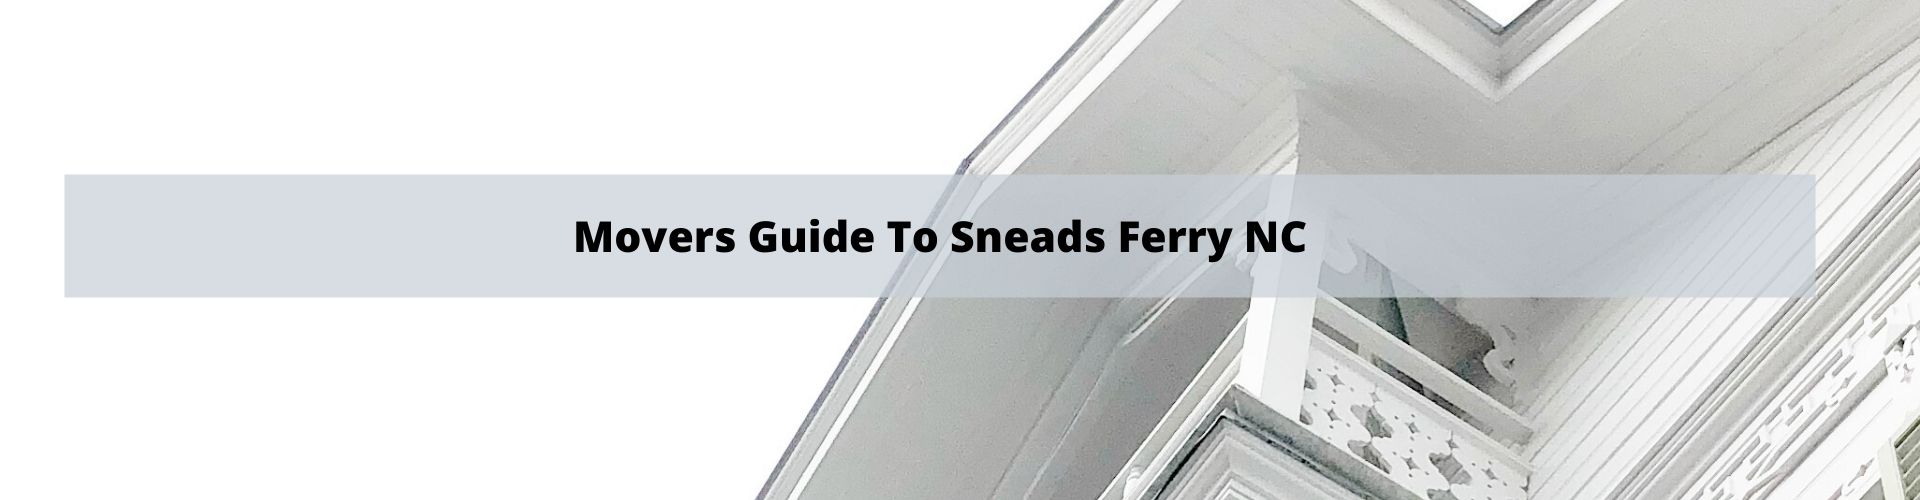 Mover's Guide to Sneads Ferry NC